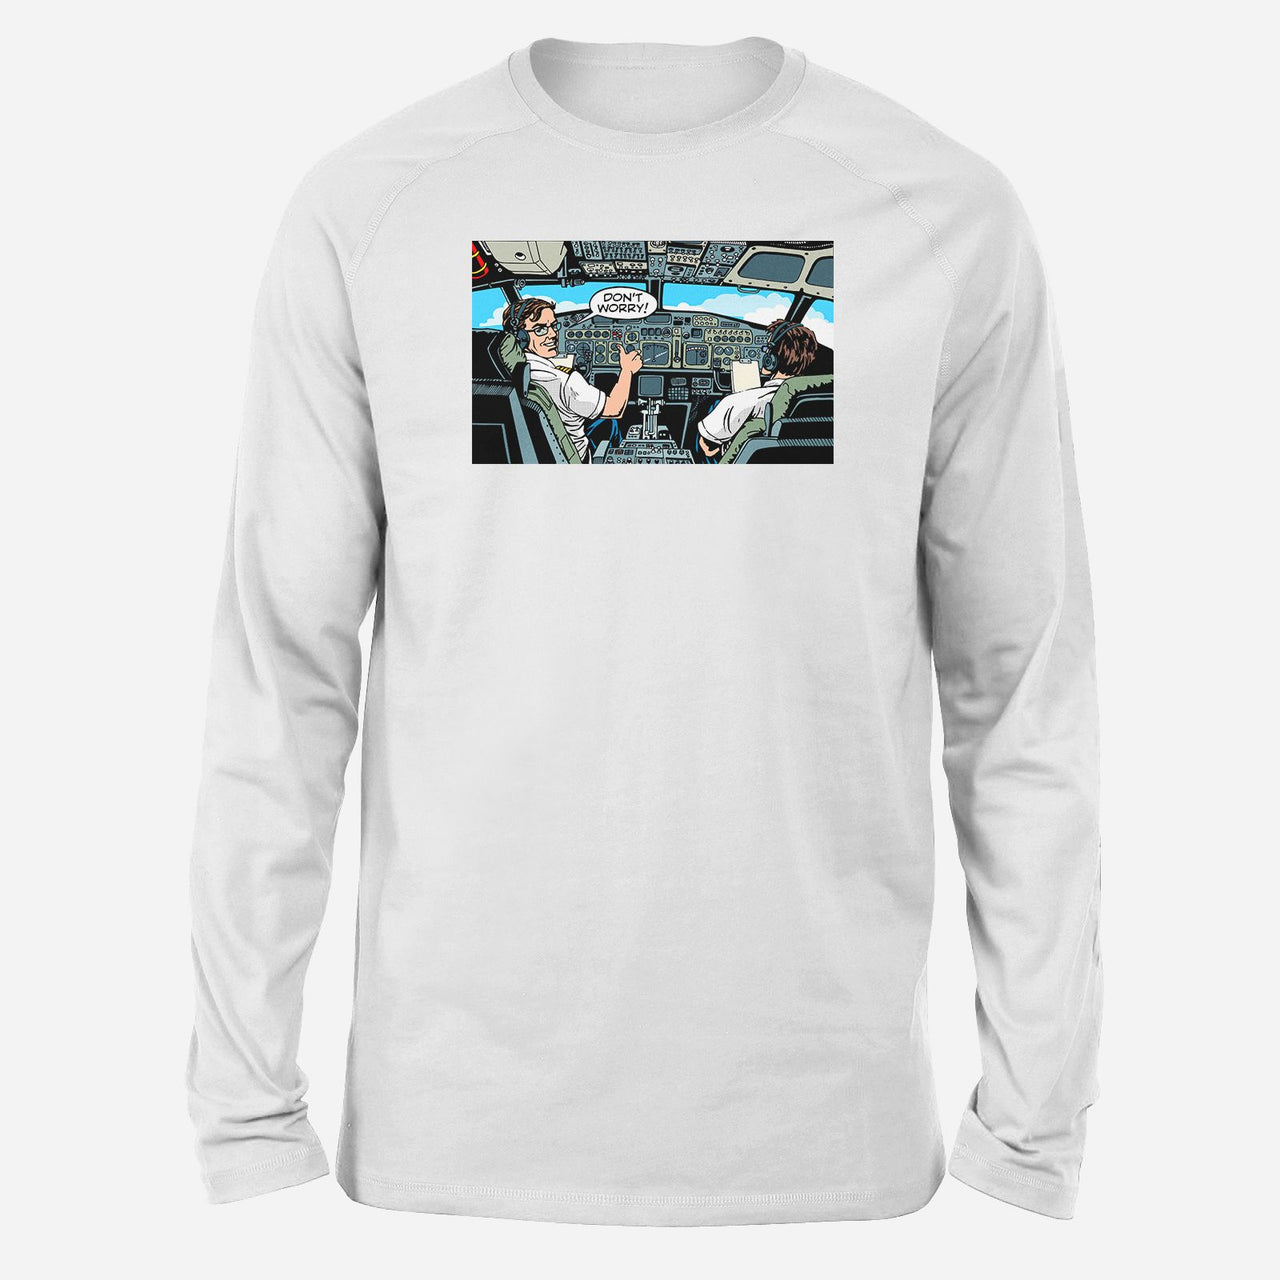 Don't Worry Thumb Up Captain Designed Long-Sleeve T-Shirts